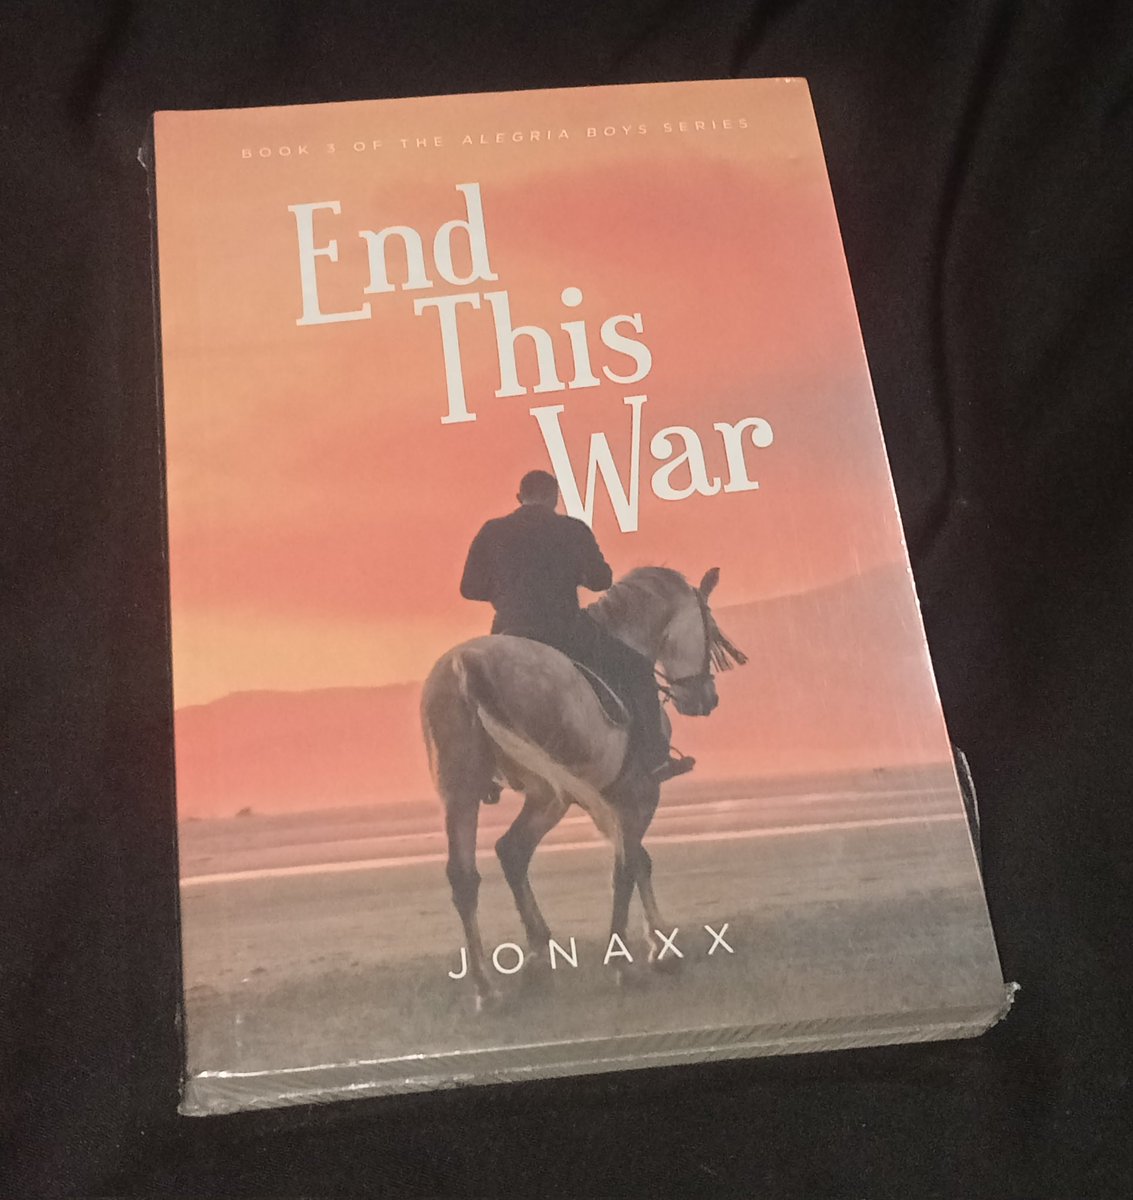 For sale ‼️‼️‼️

END THIS WAR BY JONAXX

NEW/UNSEALED

PRICE: 350 (+SF)

LOCATION: PARAÑAQUE 

#Jonaxxbooks 
#Wattpad